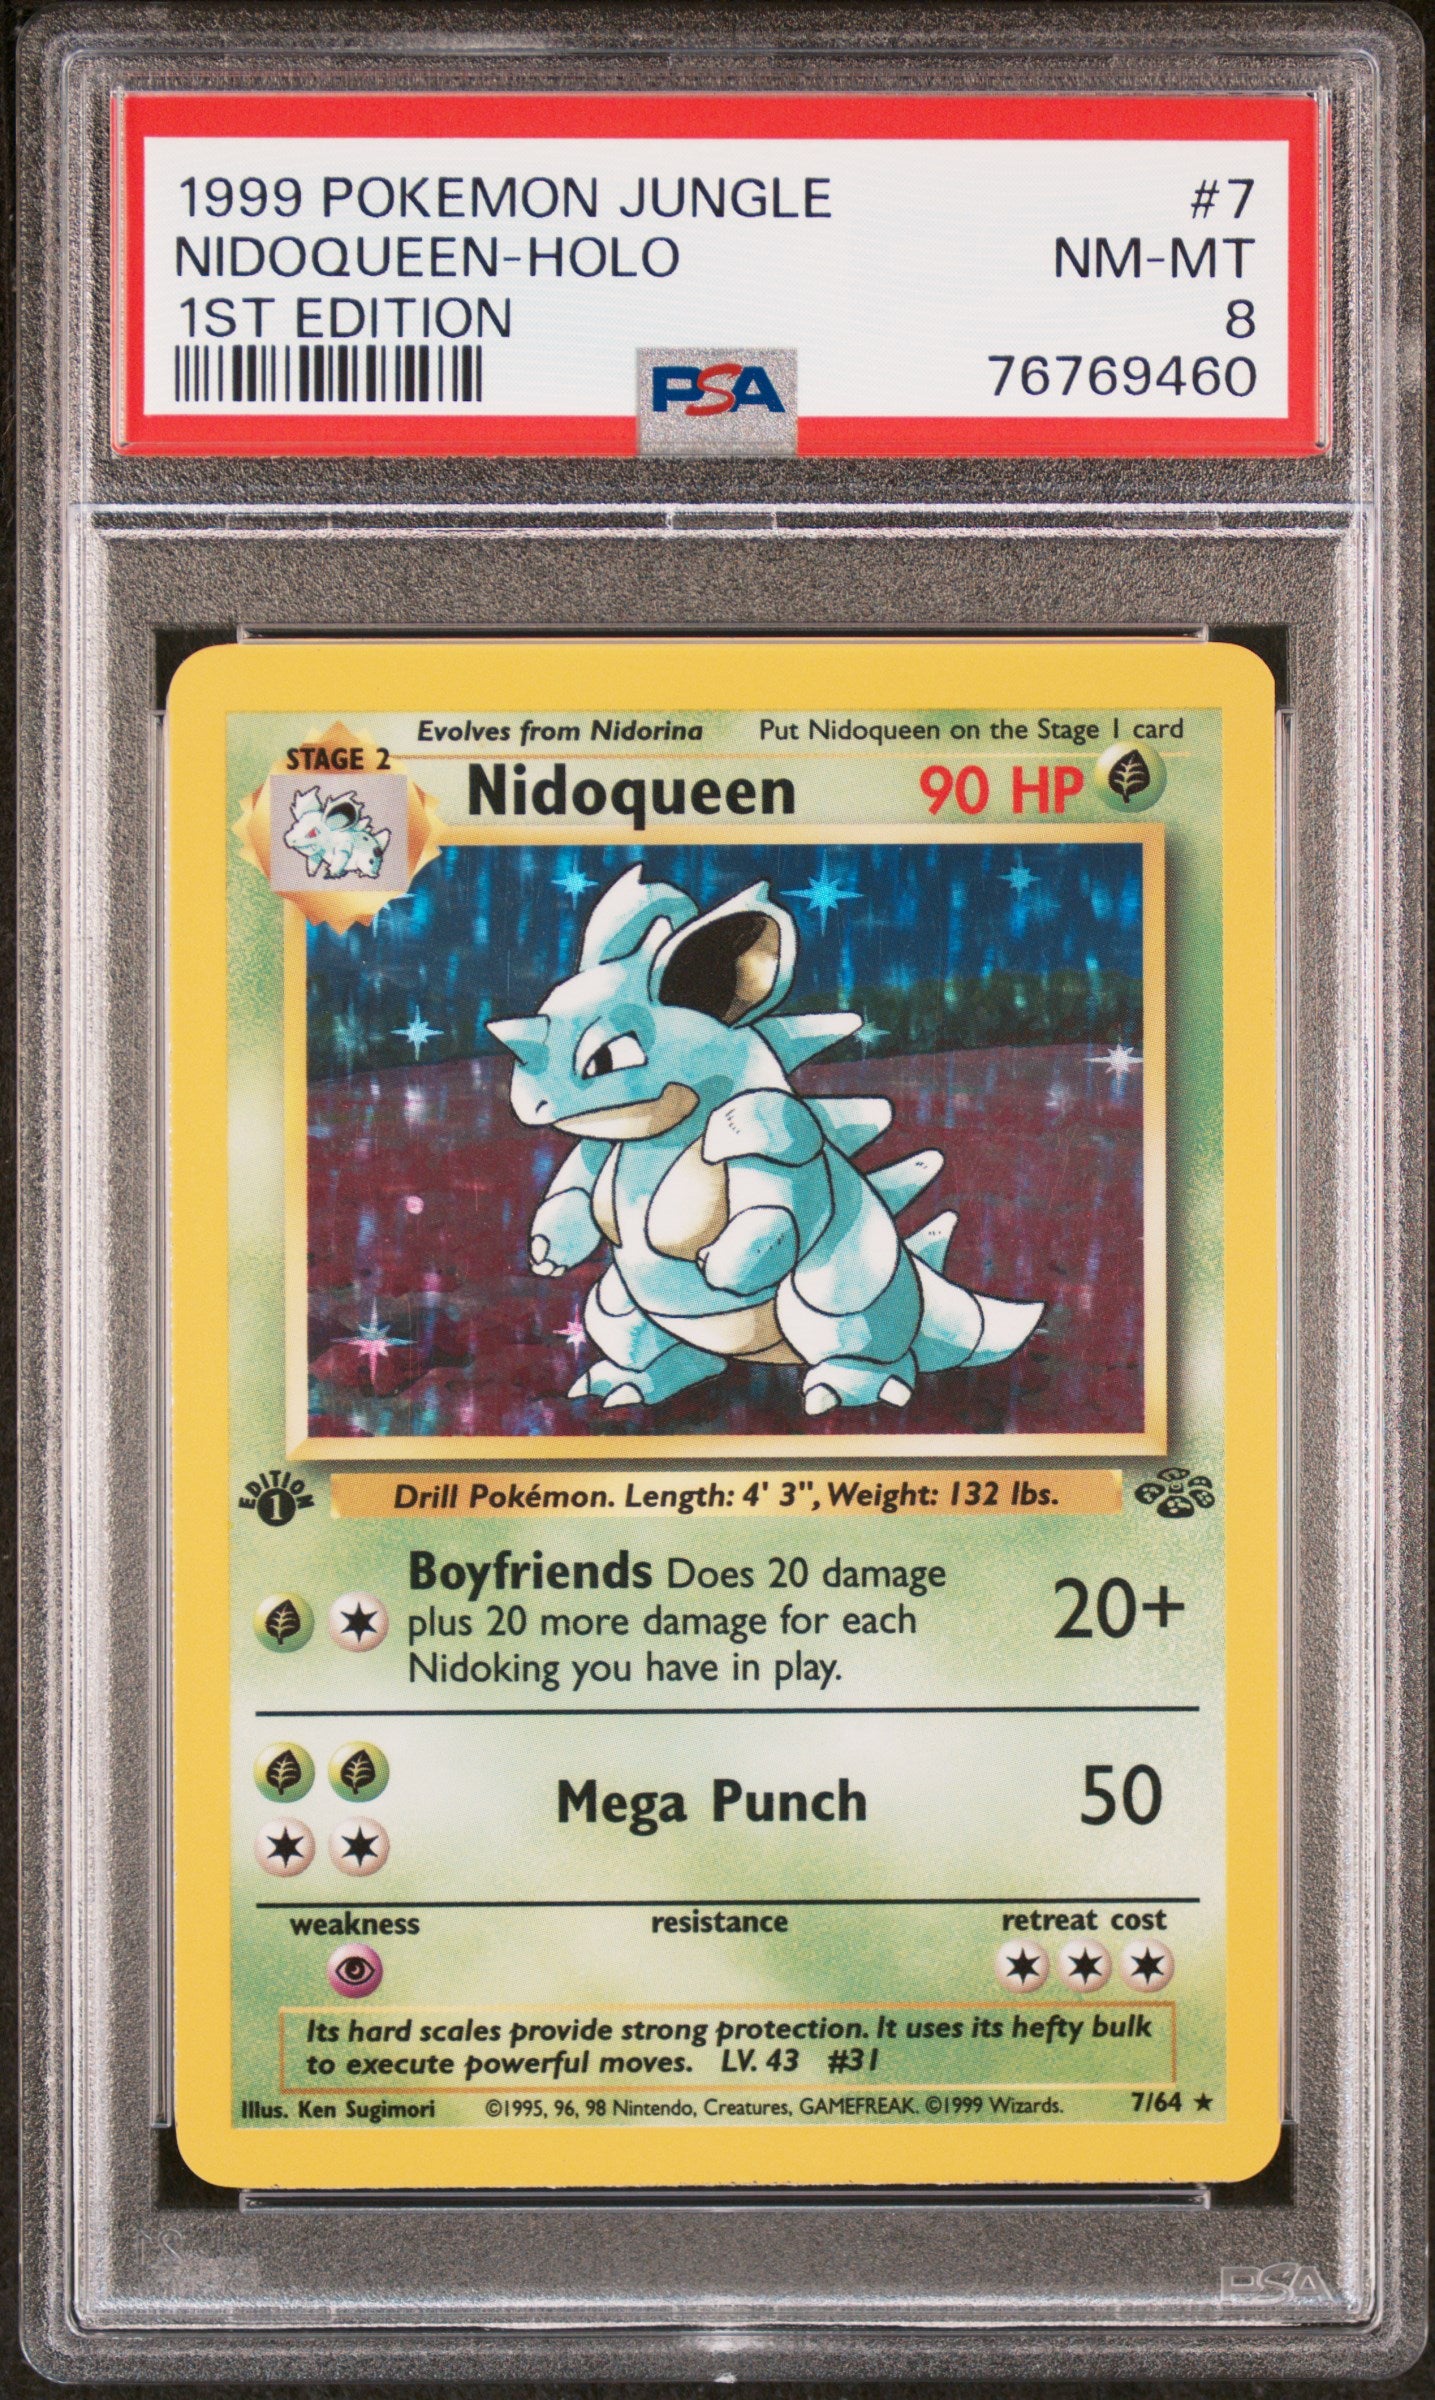 PSA 8 Nidoqueen 1st Edition Holo (Graded Card)